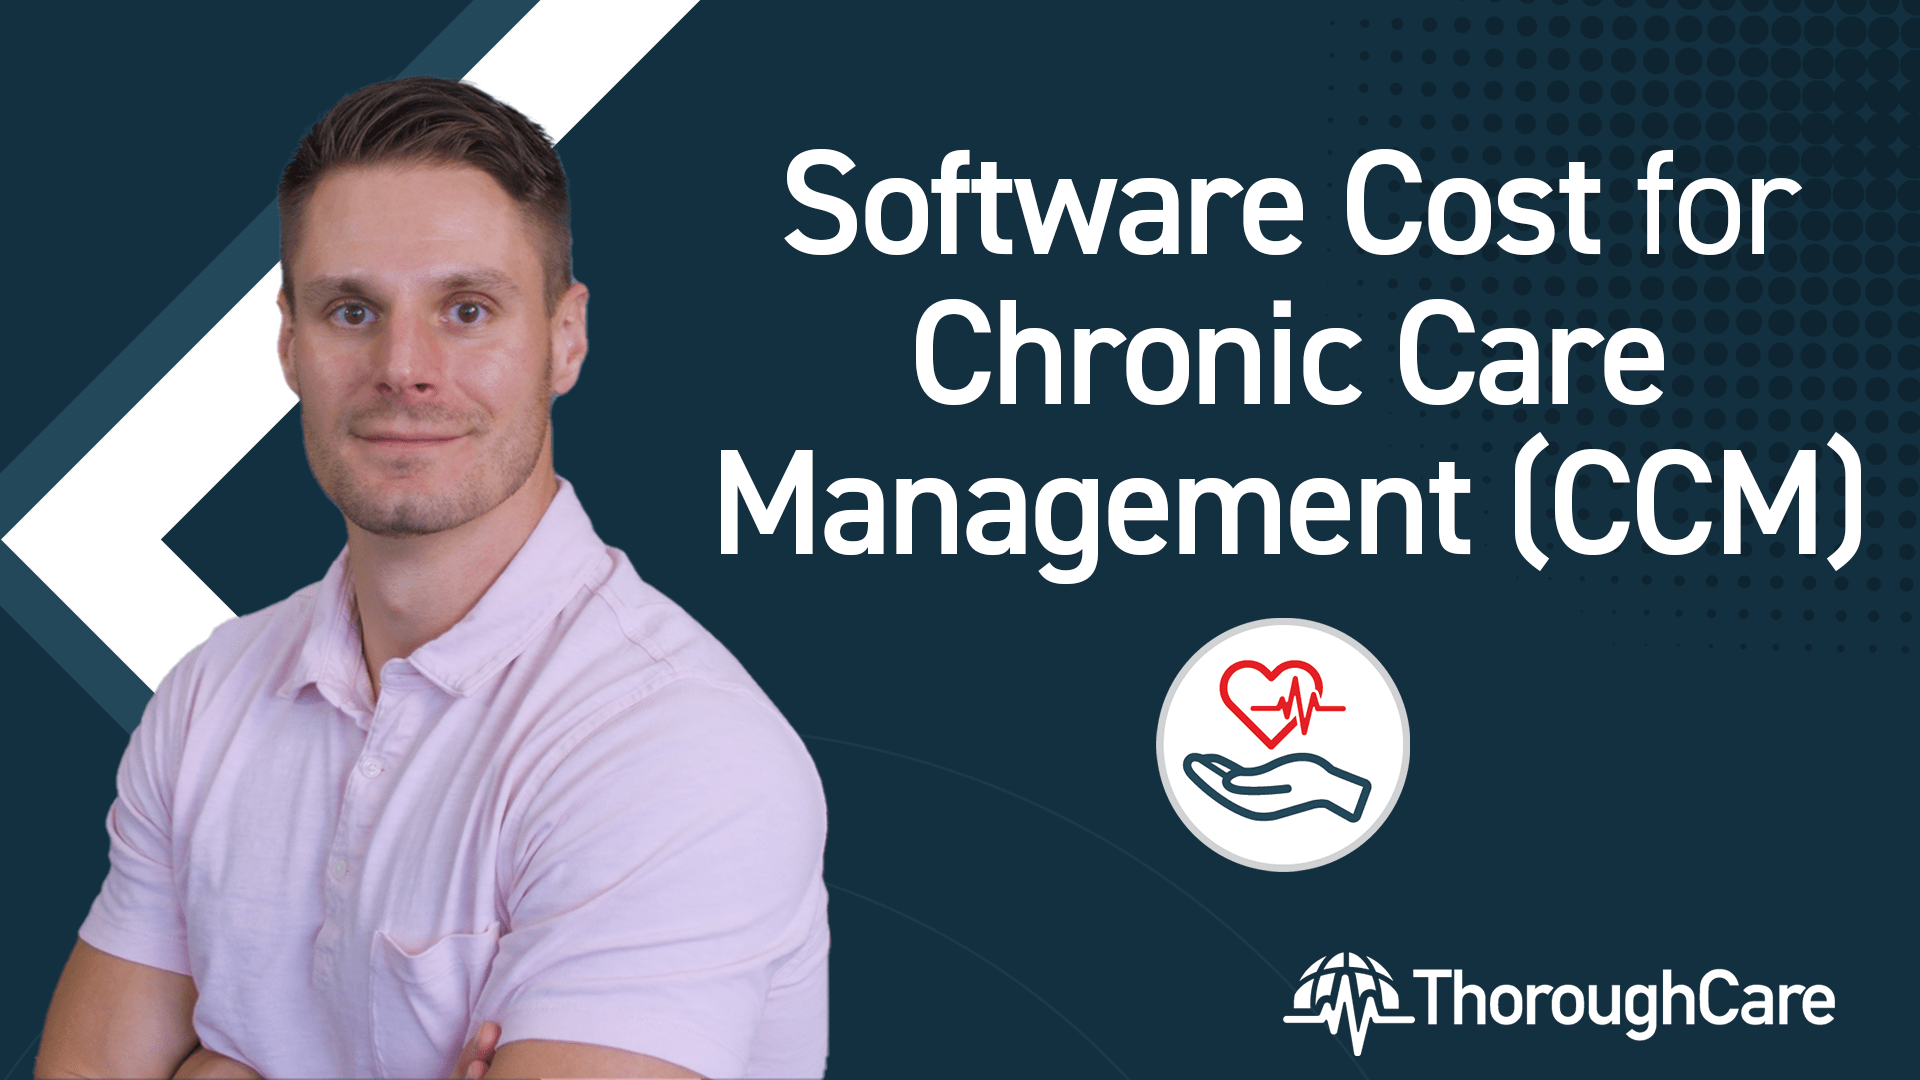 Software for Chronic Care Management: How Much Does it Cost?